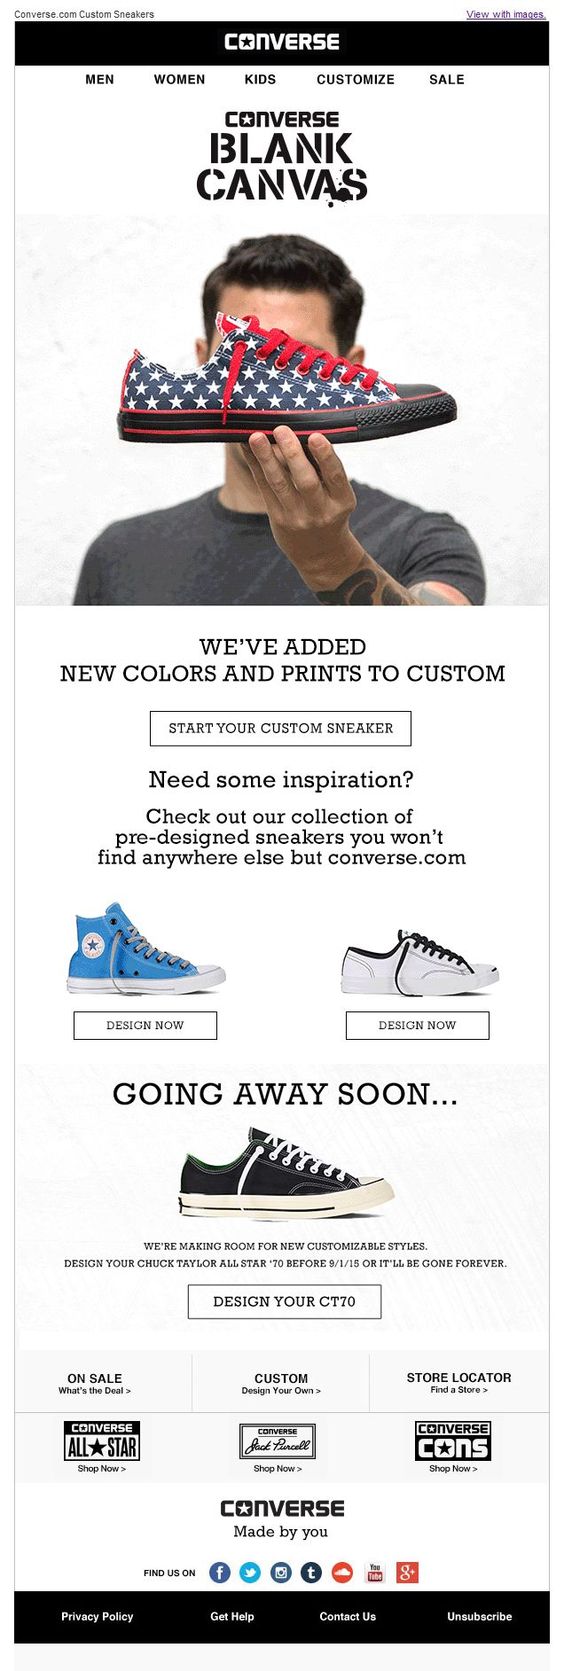 converse email promo